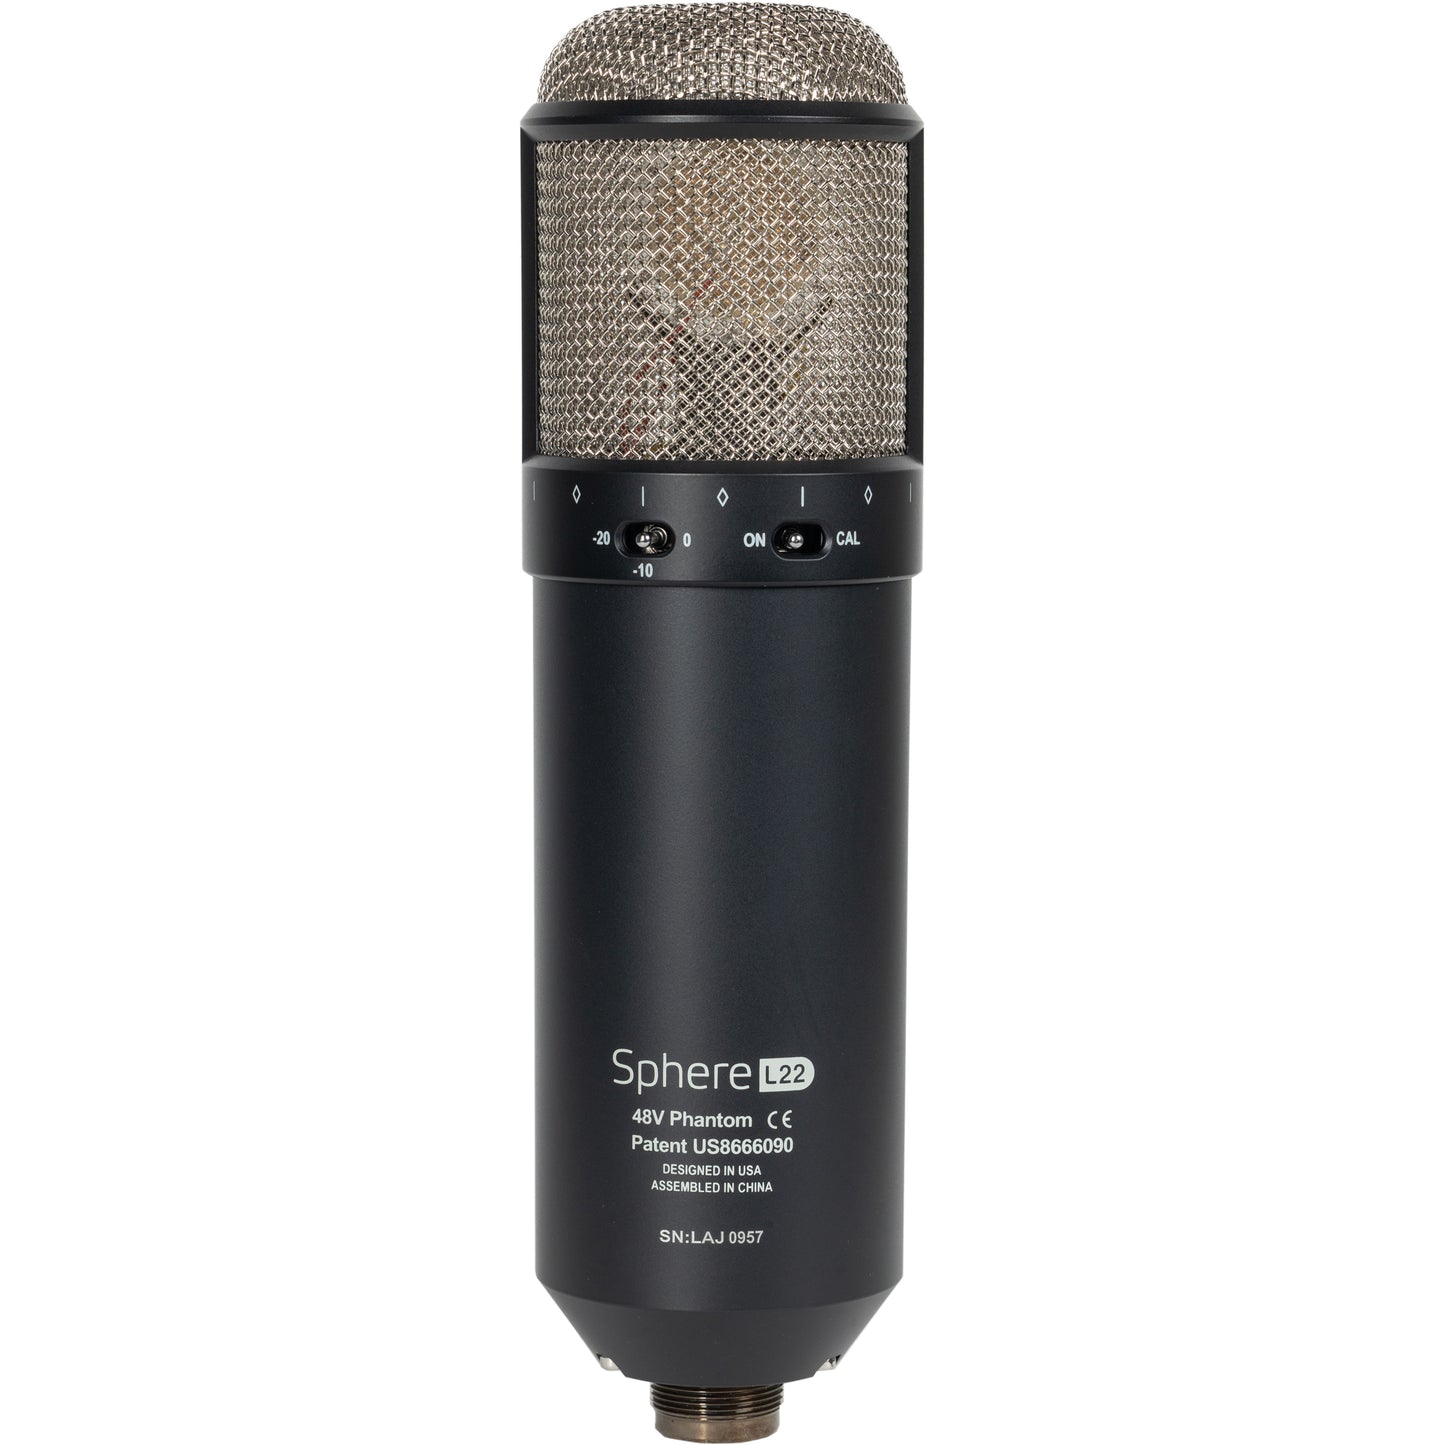 Townsend Labs Sphere L22 Modeling Microphone